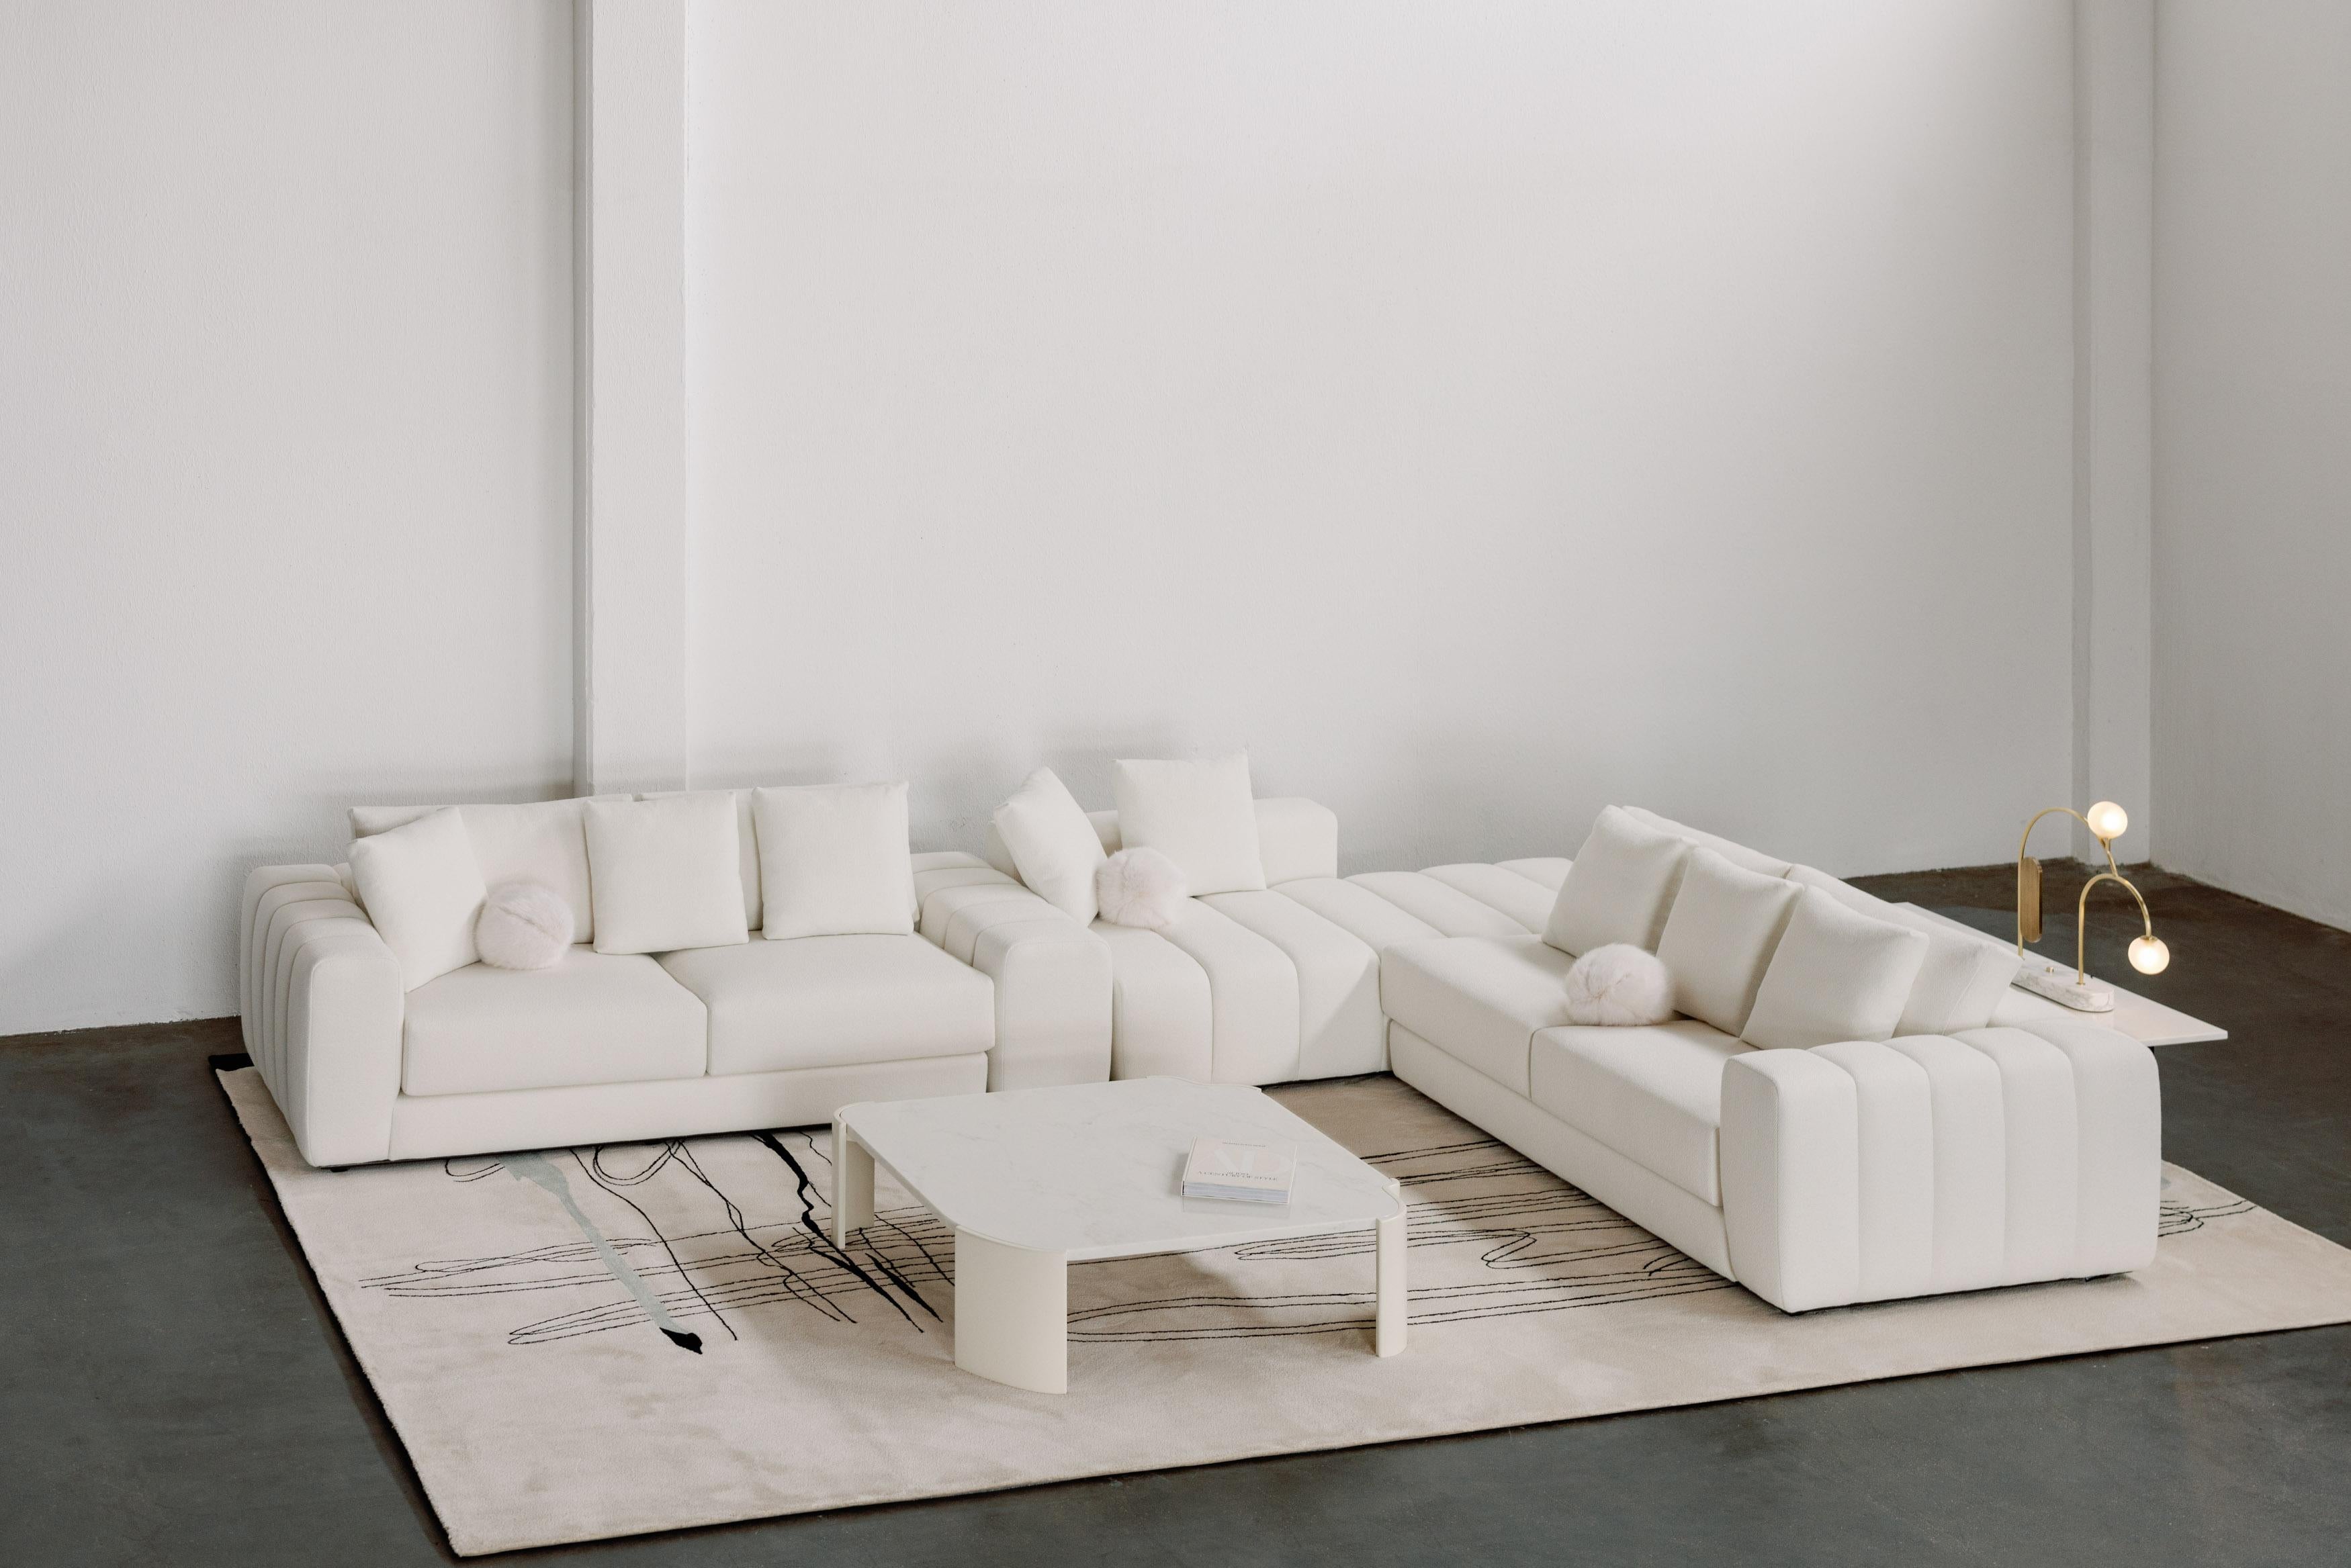 Coast Mudular Sofa, Contemporary Collection, Handcrafted in Portugal - Europe by Greenapple.

The modern Coast modular sofa was designed to bring a sense of calm and peace to anyone who dares to dig deep into relaxation. Upholstered in luxurious